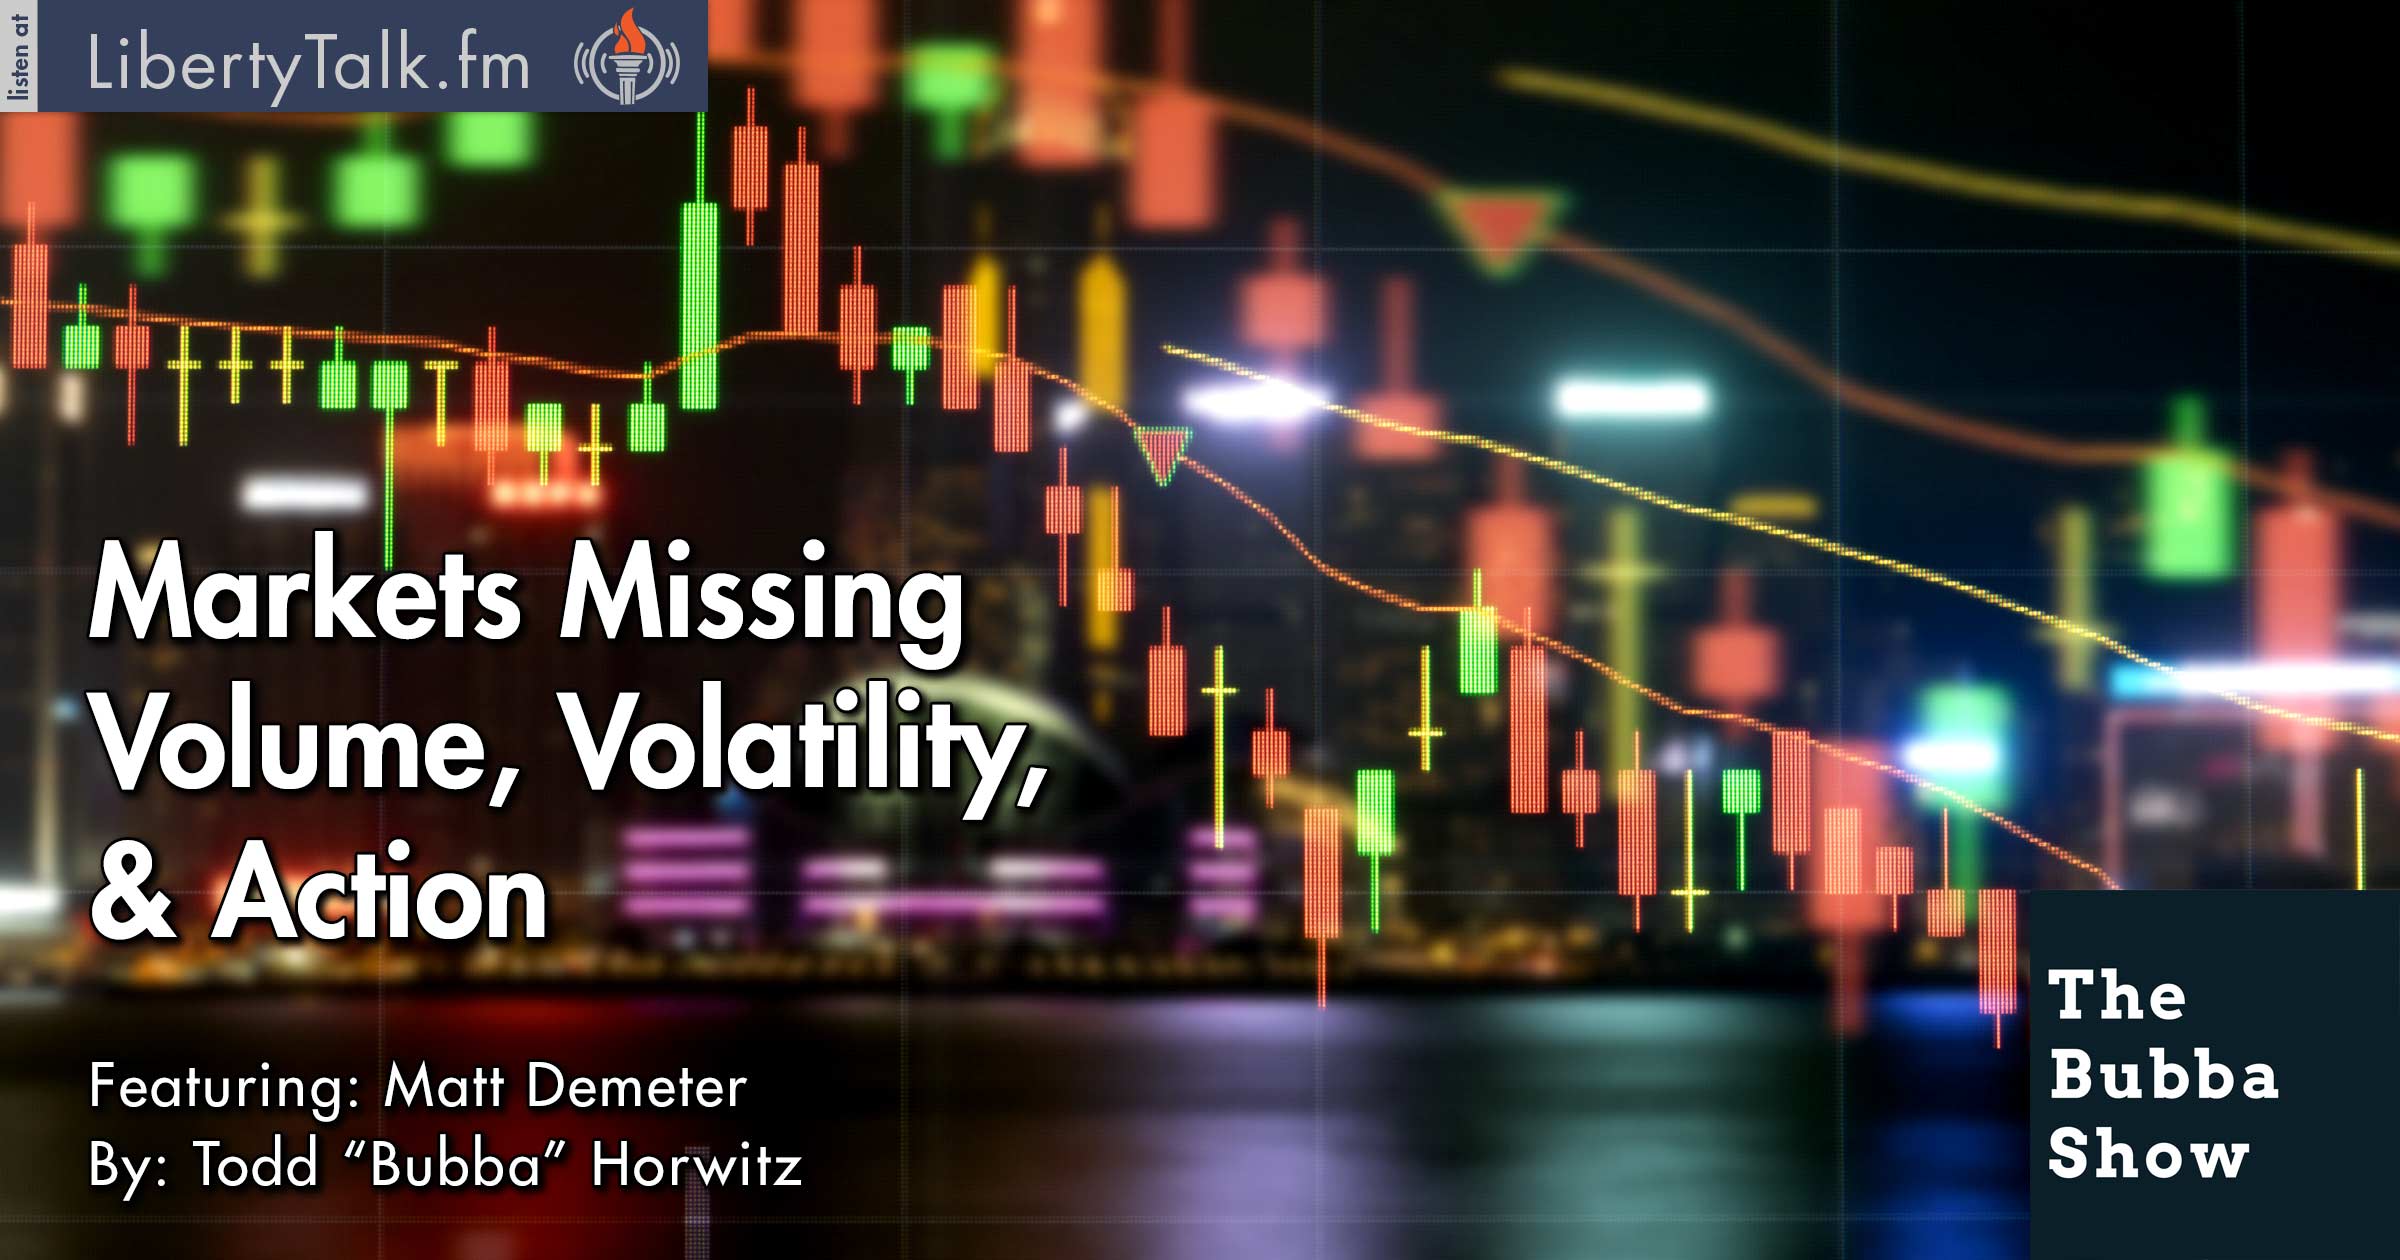 Markets Missing Volume, Volatility, & Action - The Bubba Show